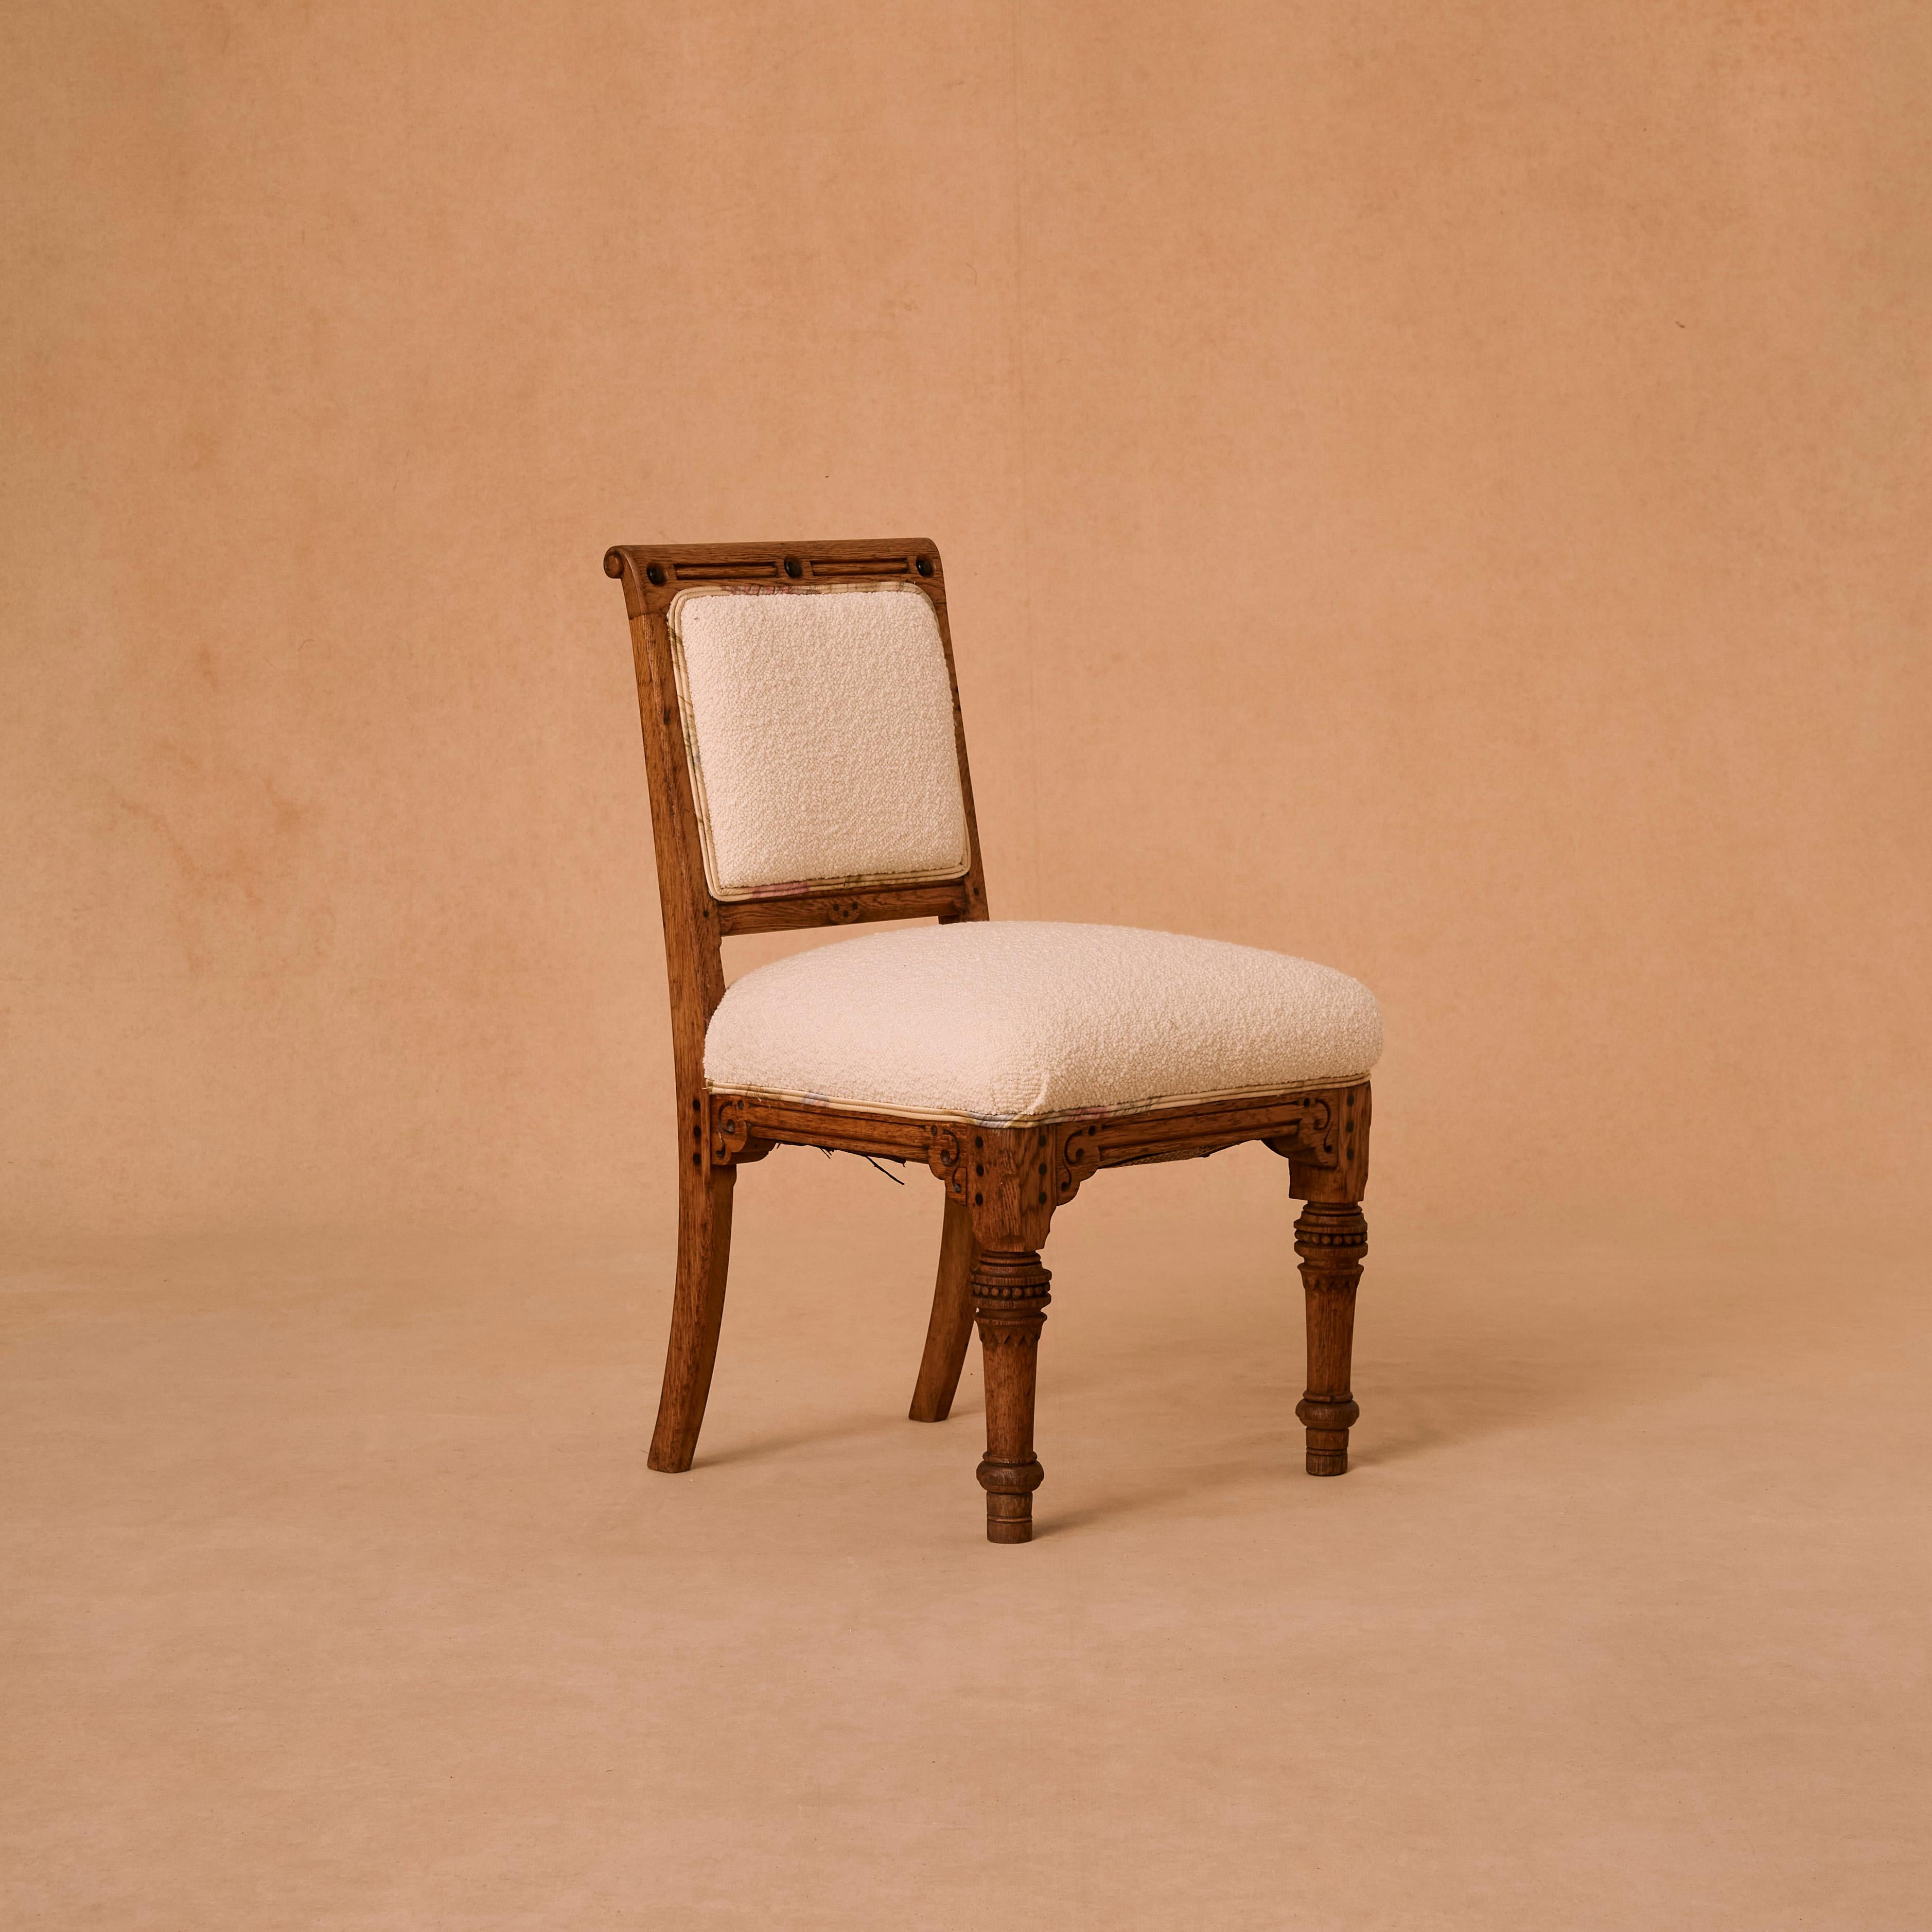 Chaise ancienne en bois circa 1930 reupholstered in ivory boucle fabric.